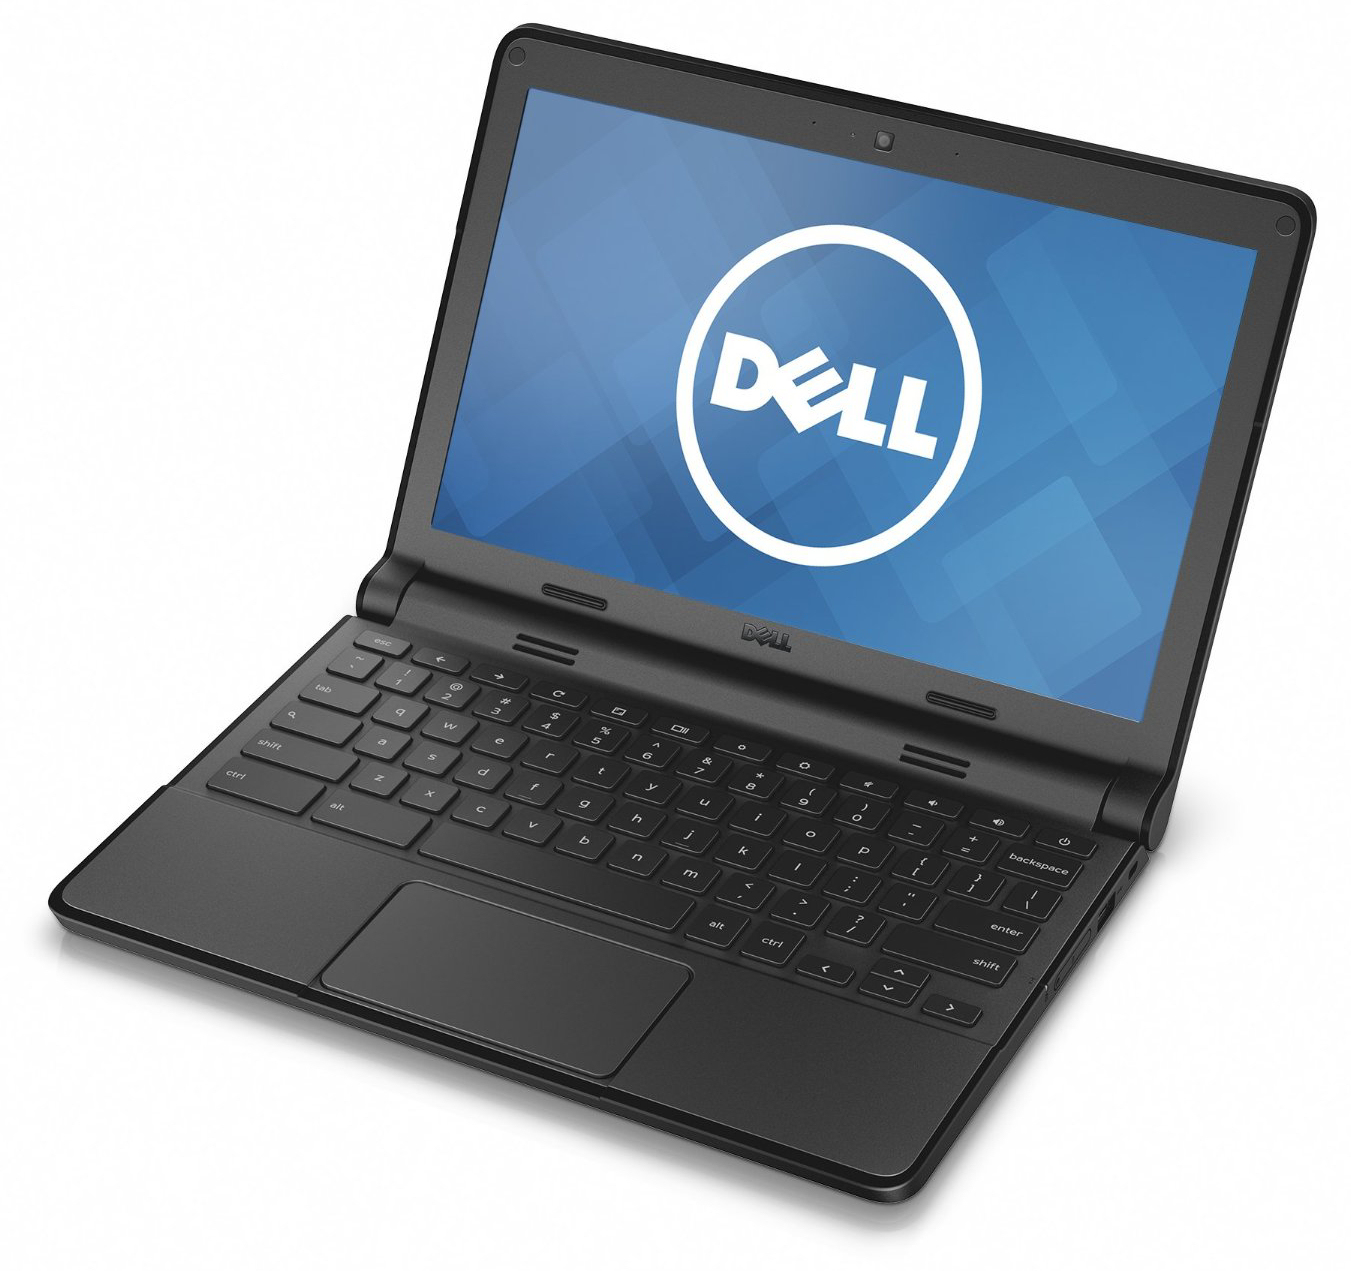 Dell Chromebook 11 (3120) Review - NotebookCheck.net Reviews